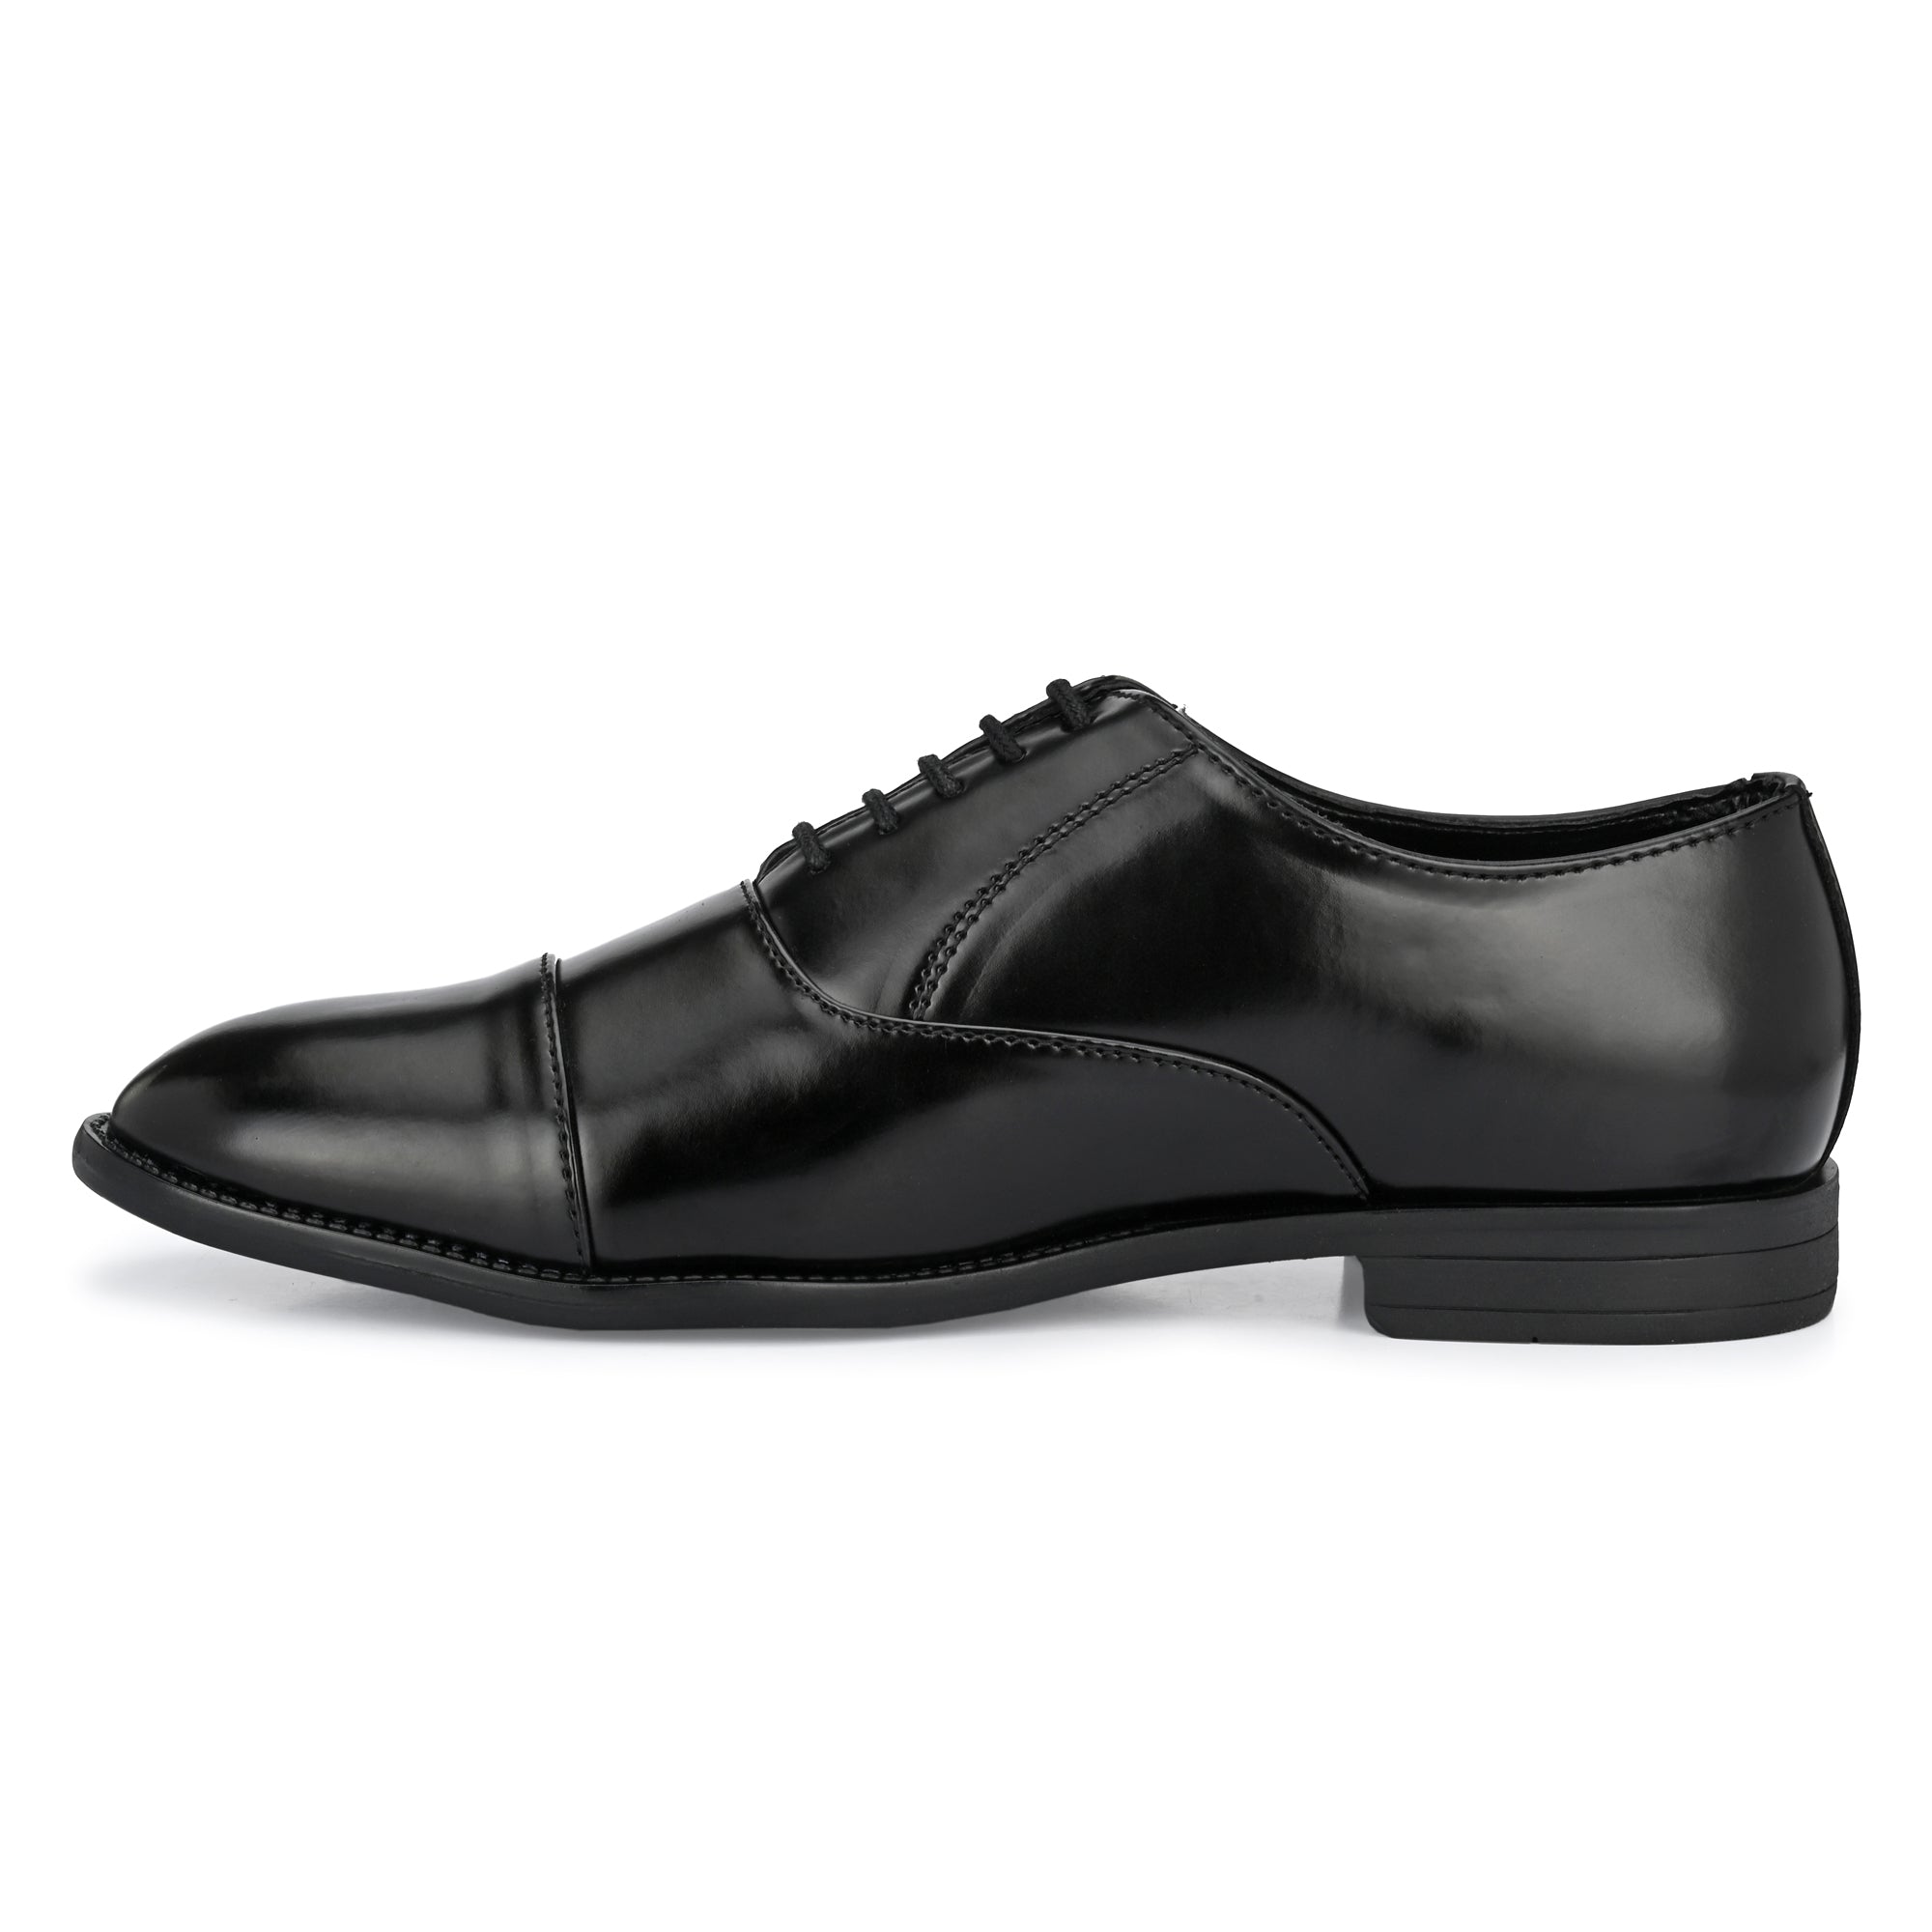 Attitudist Handcrafted Oxford Black Plain Formal Laceup Derby Shoes With Cap Toe For Men MTOBSF